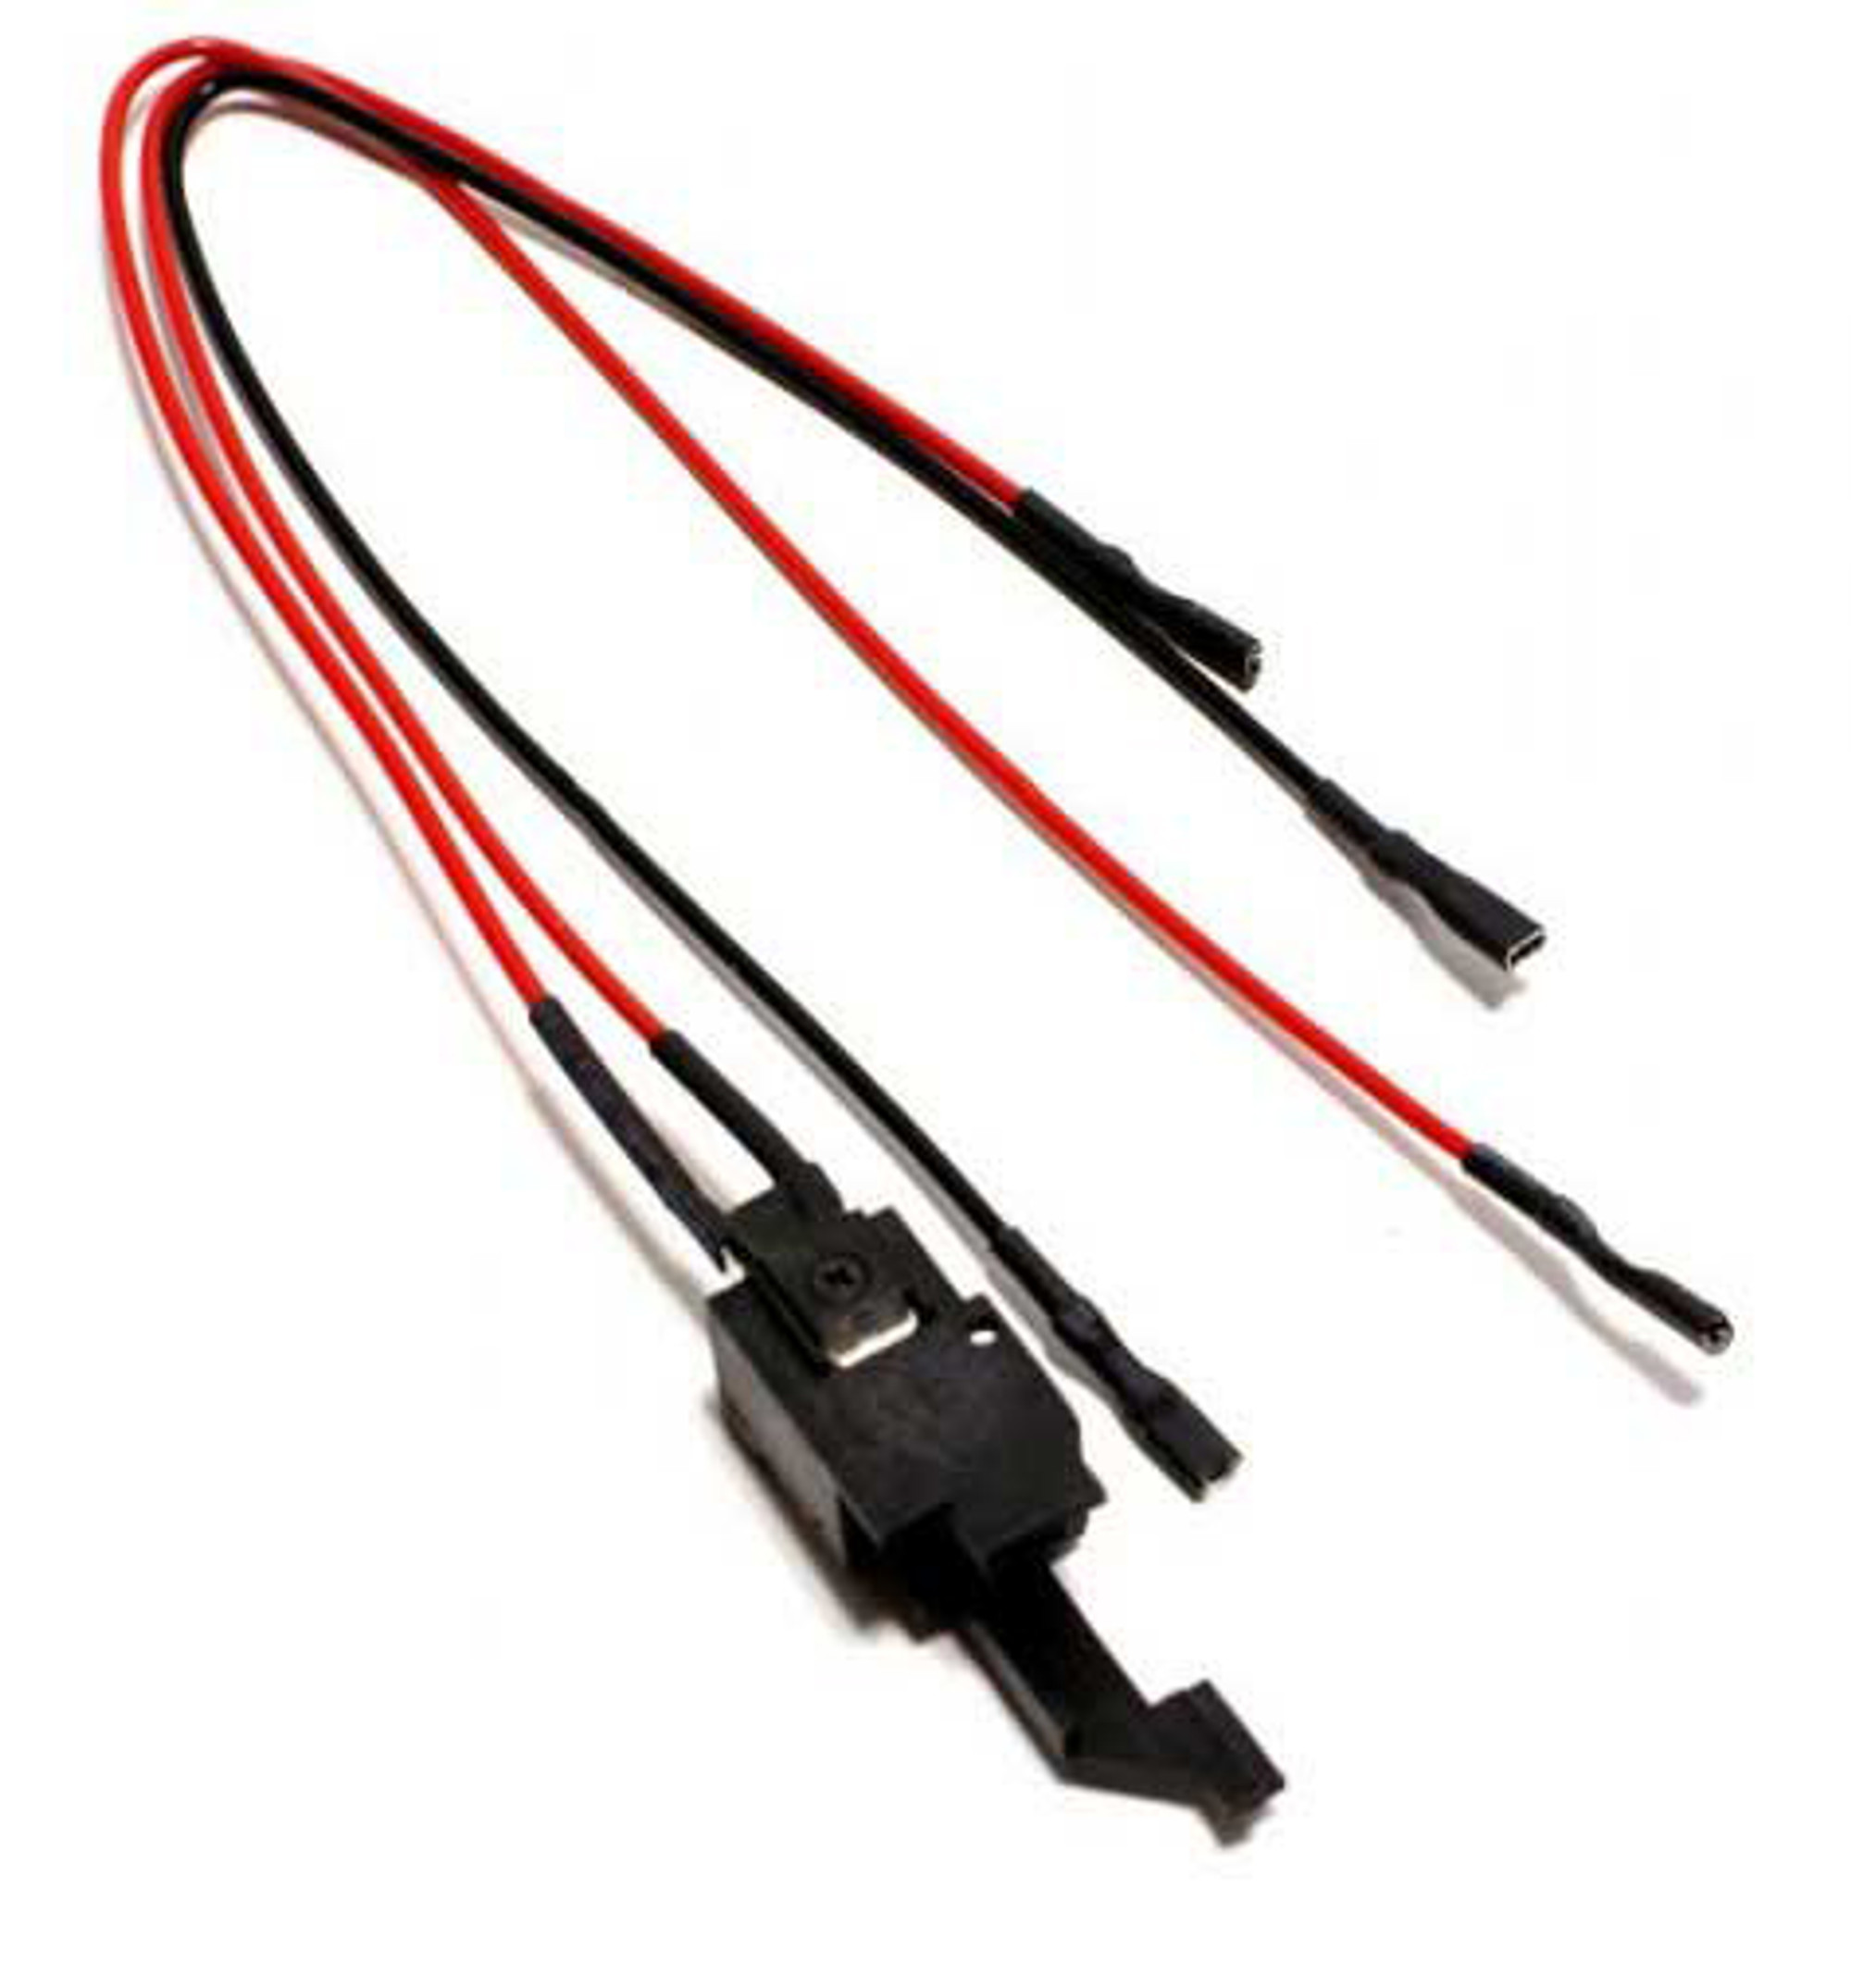 Wiring Harness for MP5K Swordfish PDW Series Airsoft AEG